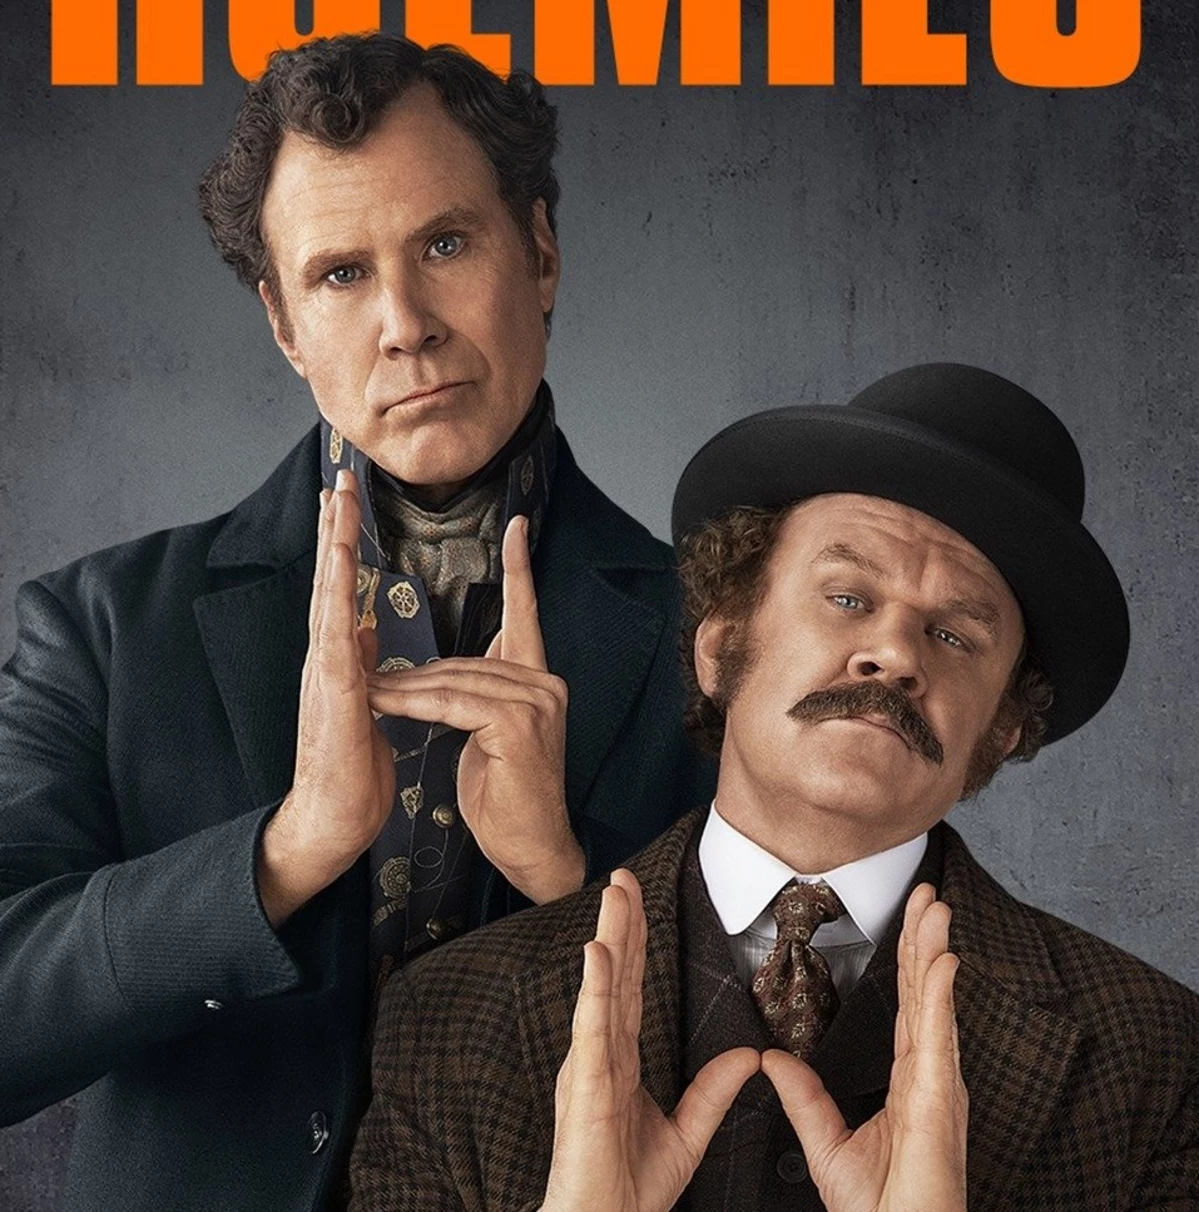 I Saw the New Will Ferrell Movie, it’s Not that Fricken Bad